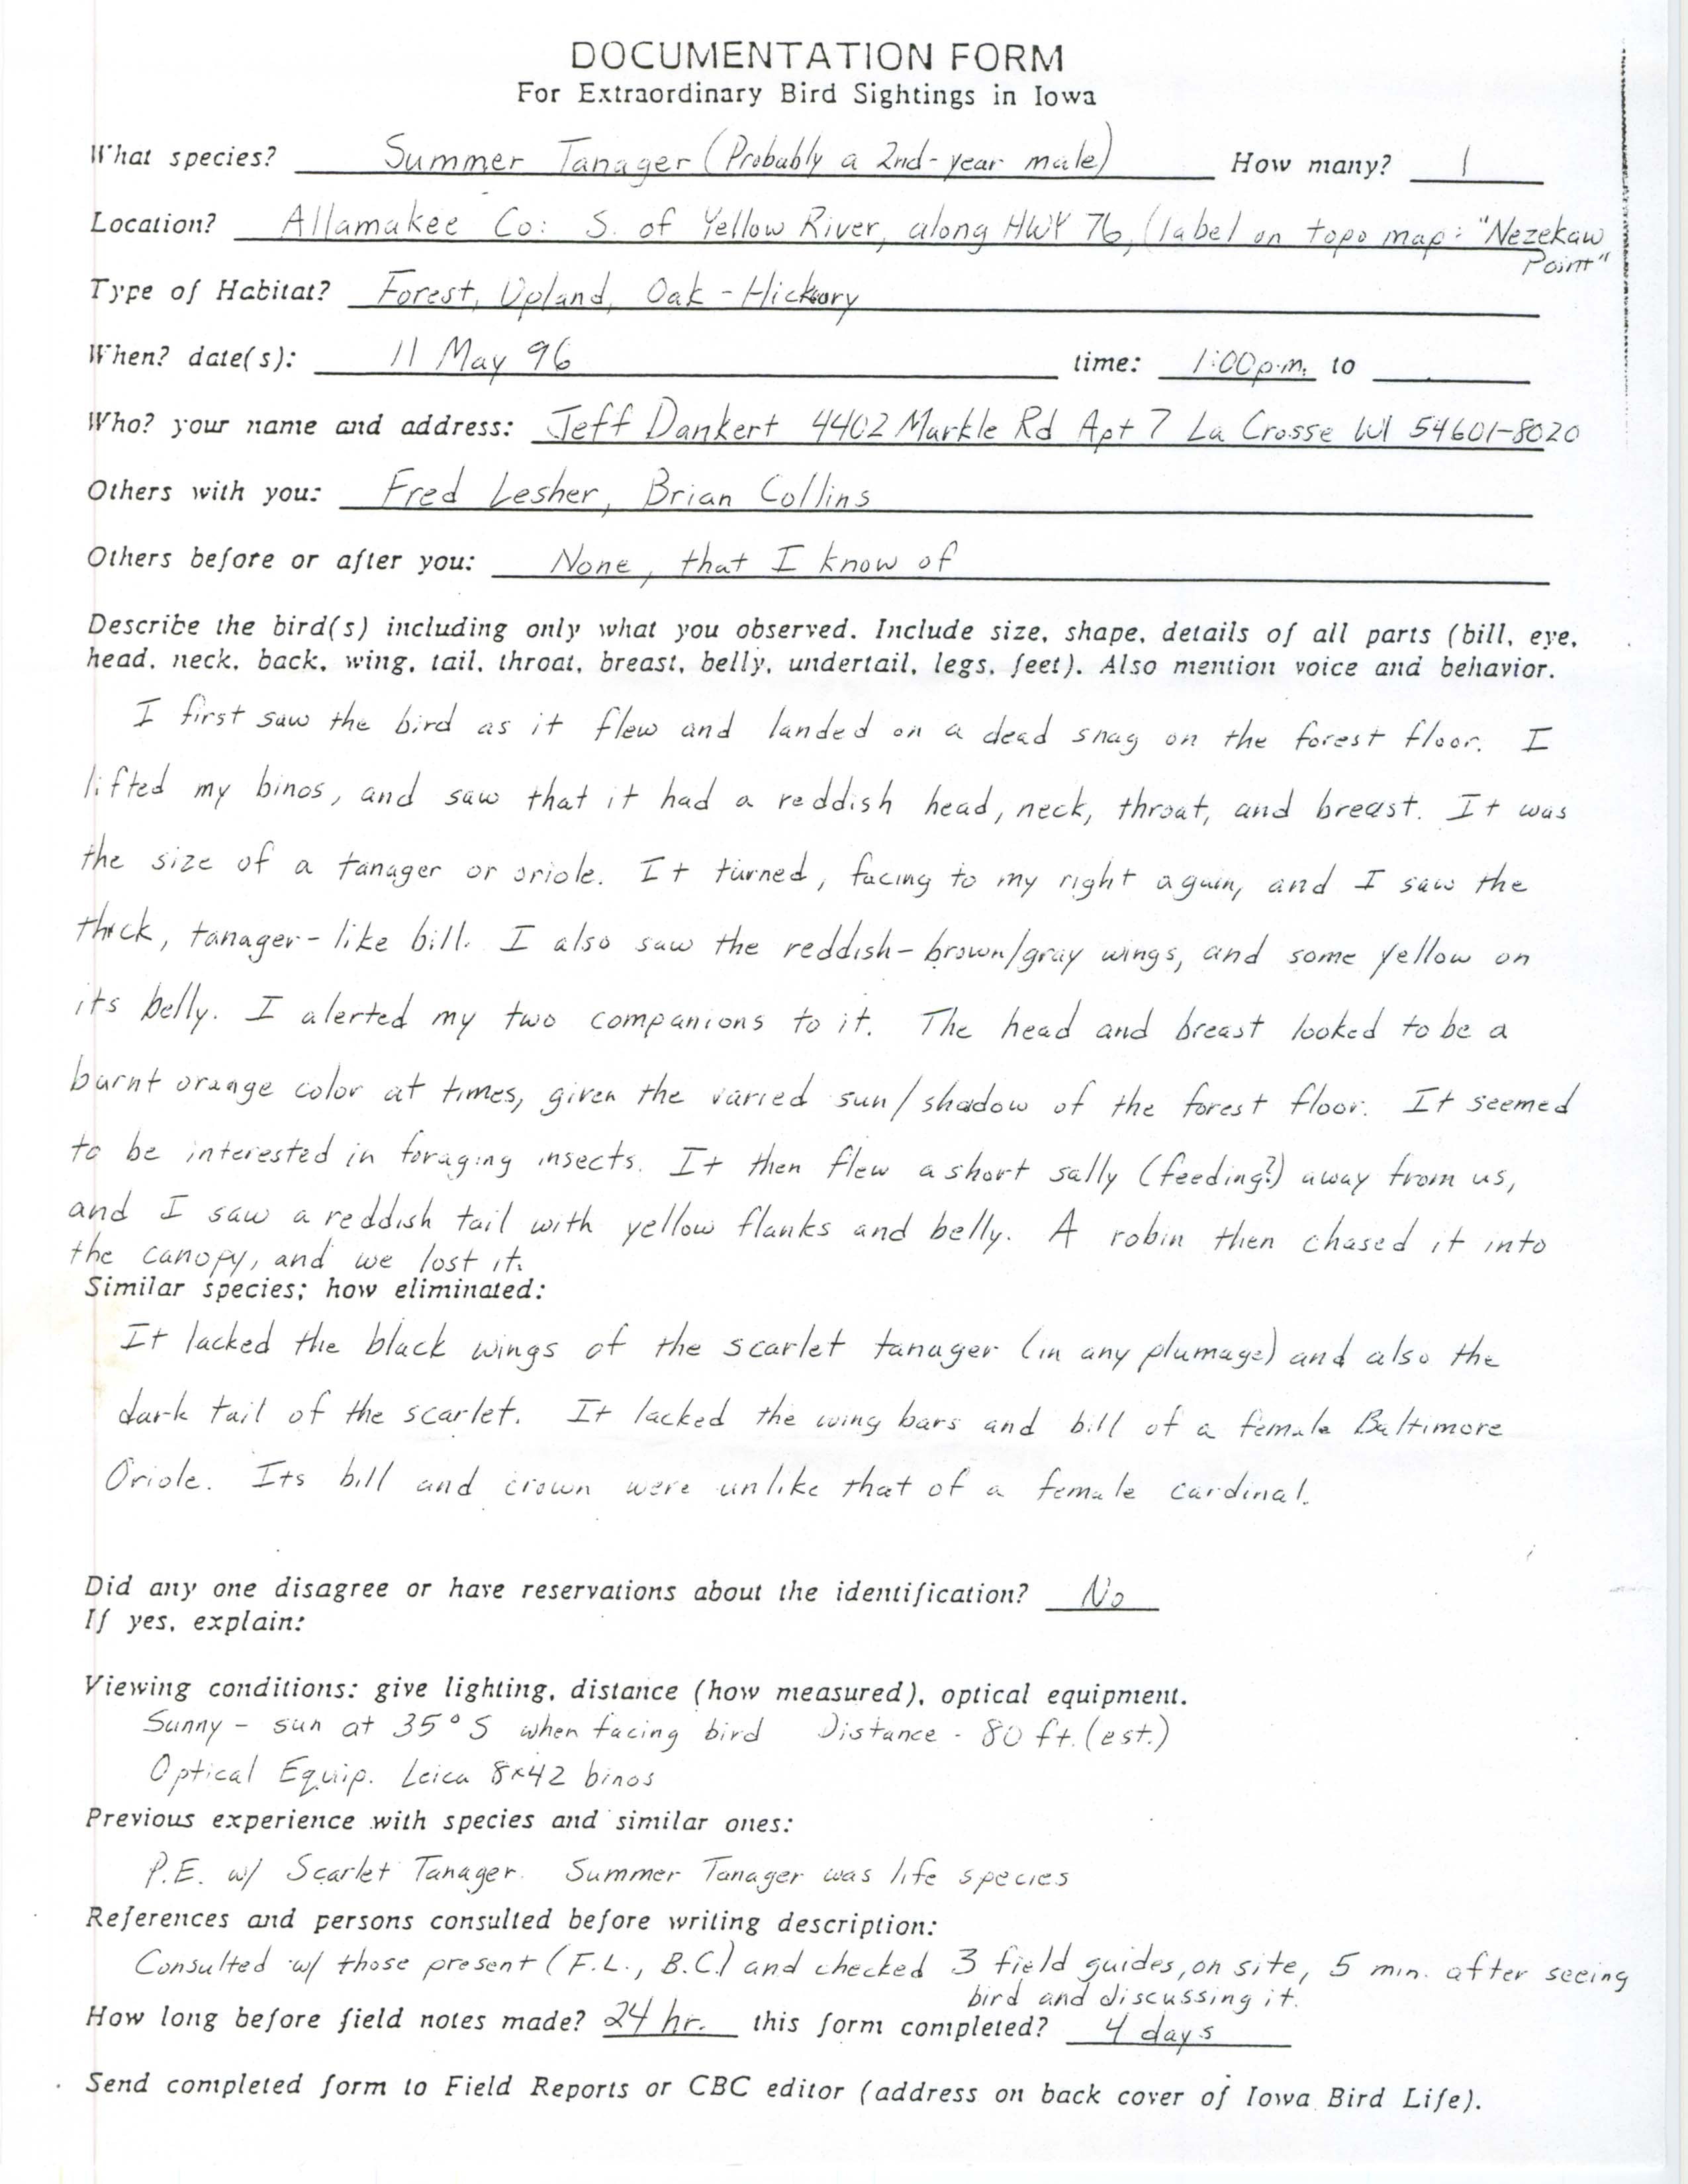 Rare bird documentation form for Summer Tanager at Nezekaw Point, 1996